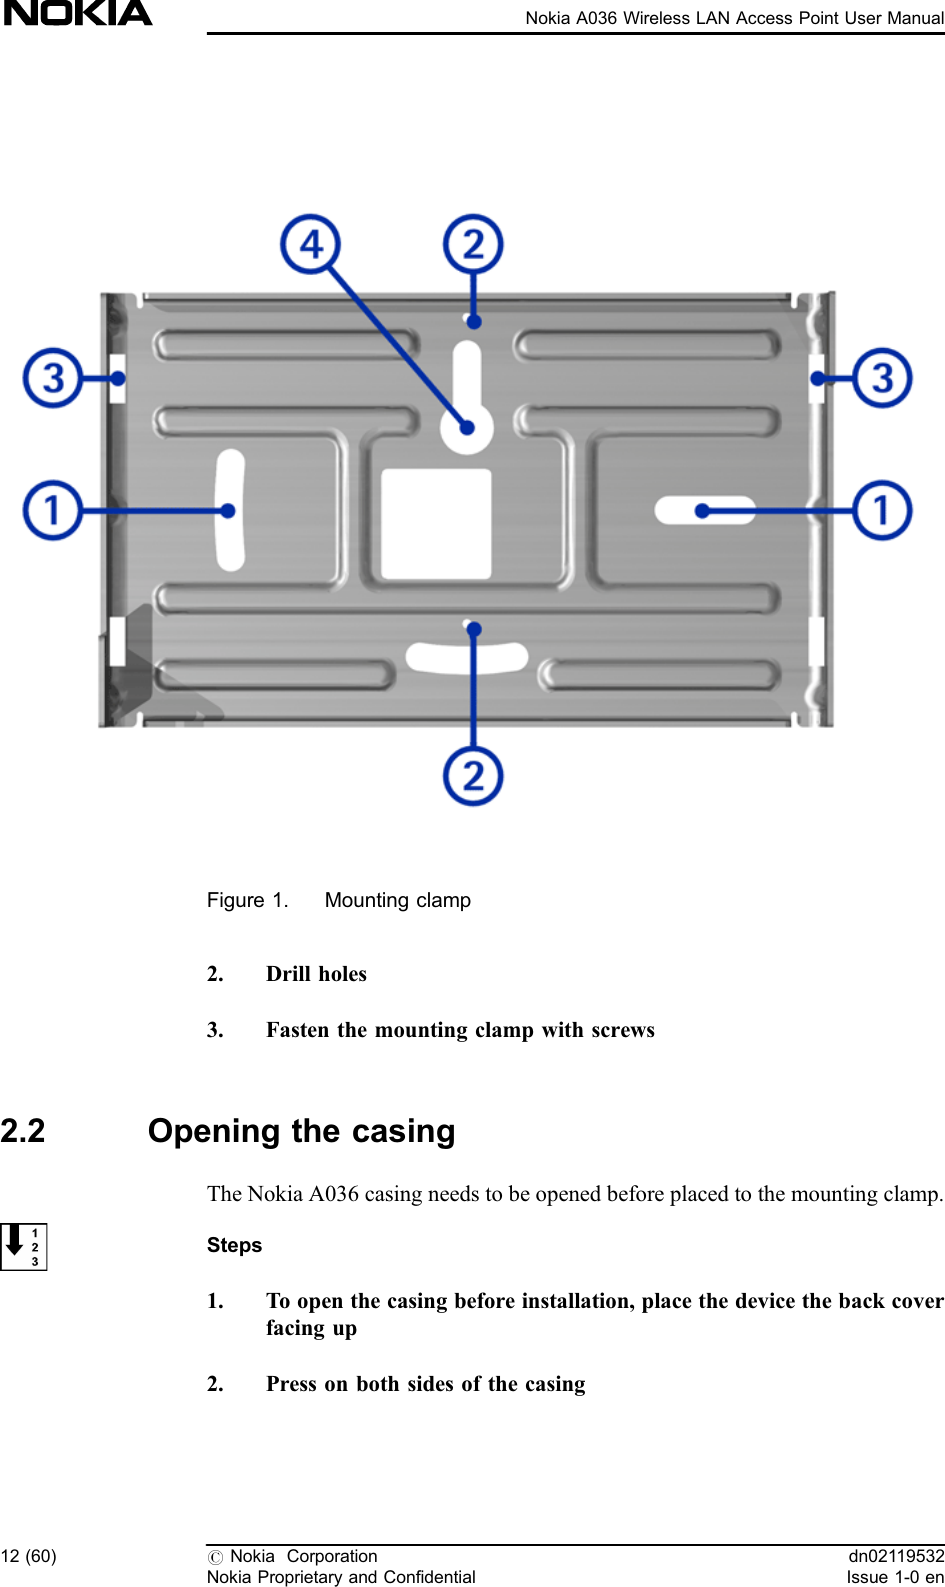 Figure 1. Mounting clamp2. Drill holes3. Fasten the mounting clamp with screws2.2 Opening the casingThe Nokia A036 casing needs to be opened before placed to the mounting clamp.Steps1. To open the casing before installation, place the device the back coverfacing up2. Press on both sides of the casing12 (60) #Nokia CorporationNokia Proprietary and Confidentialdn02119532Issue 1-0 enNokia A036 Wireless LAN Access Point User Manual